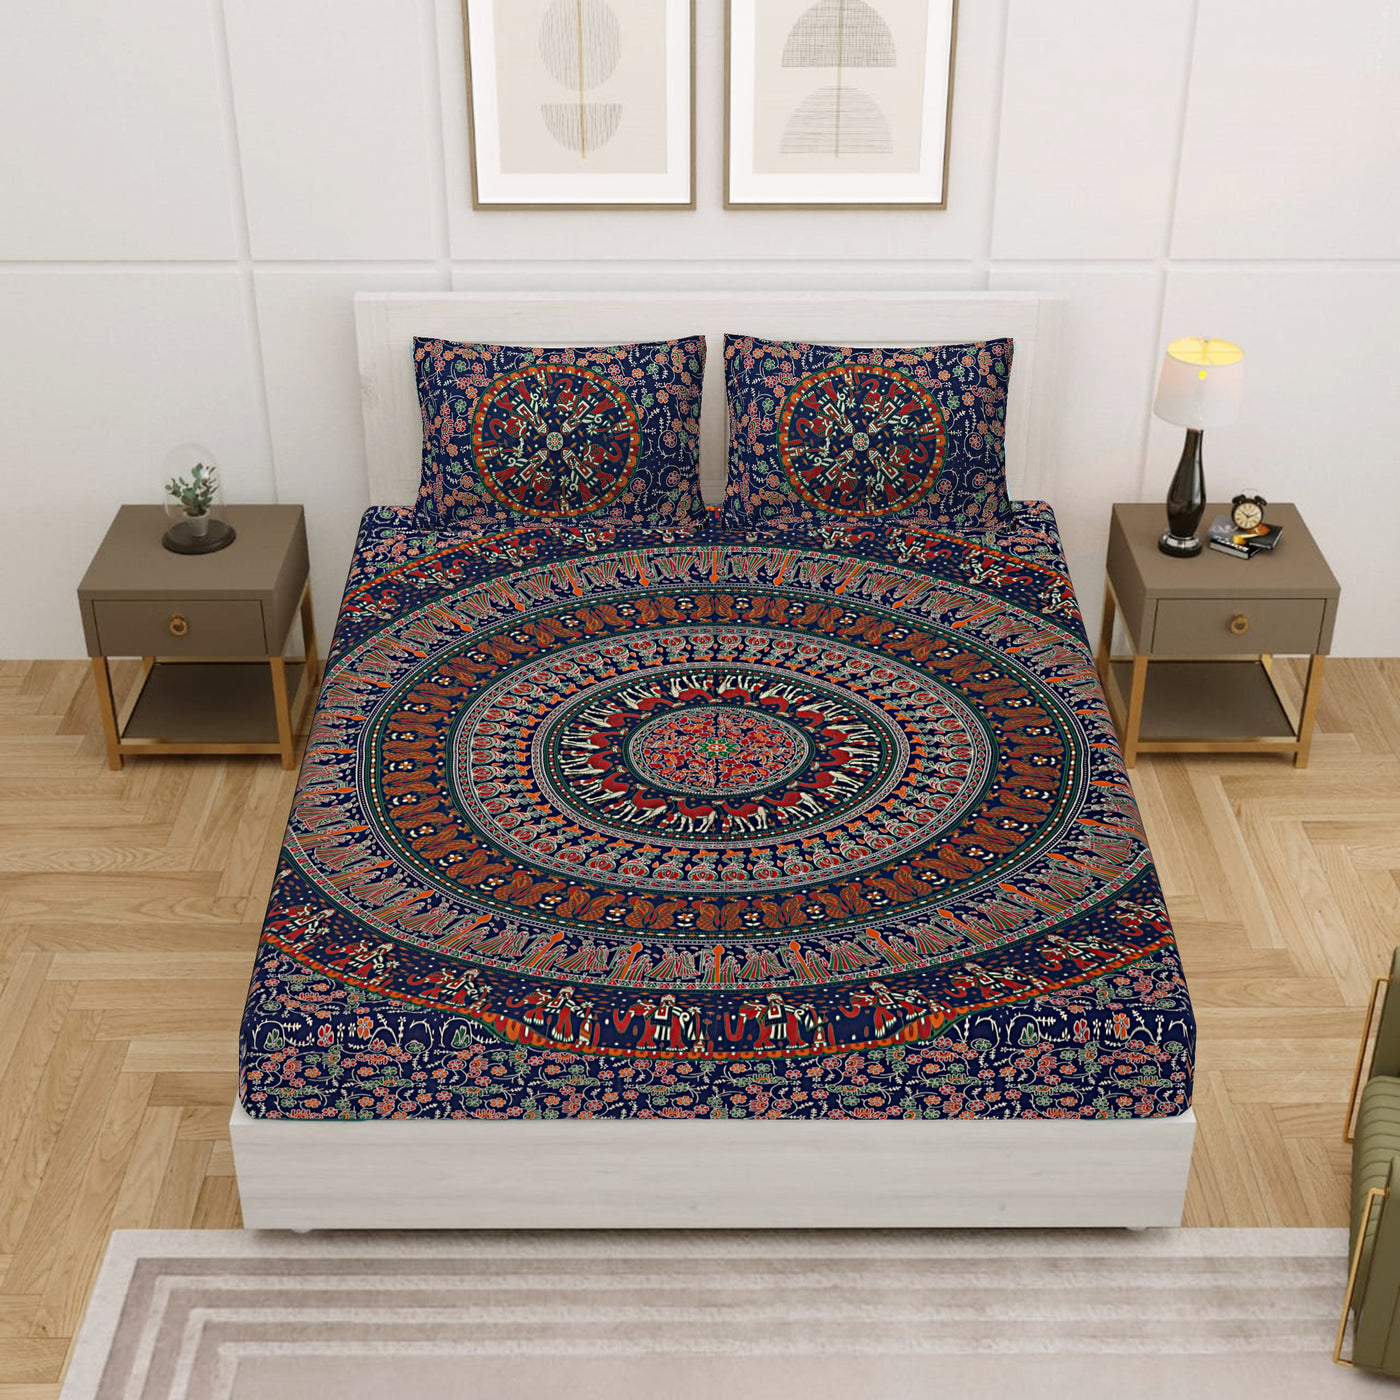 Blue Cotton Mandala Bedsheet for Double Bed with 2 Pillow Covers